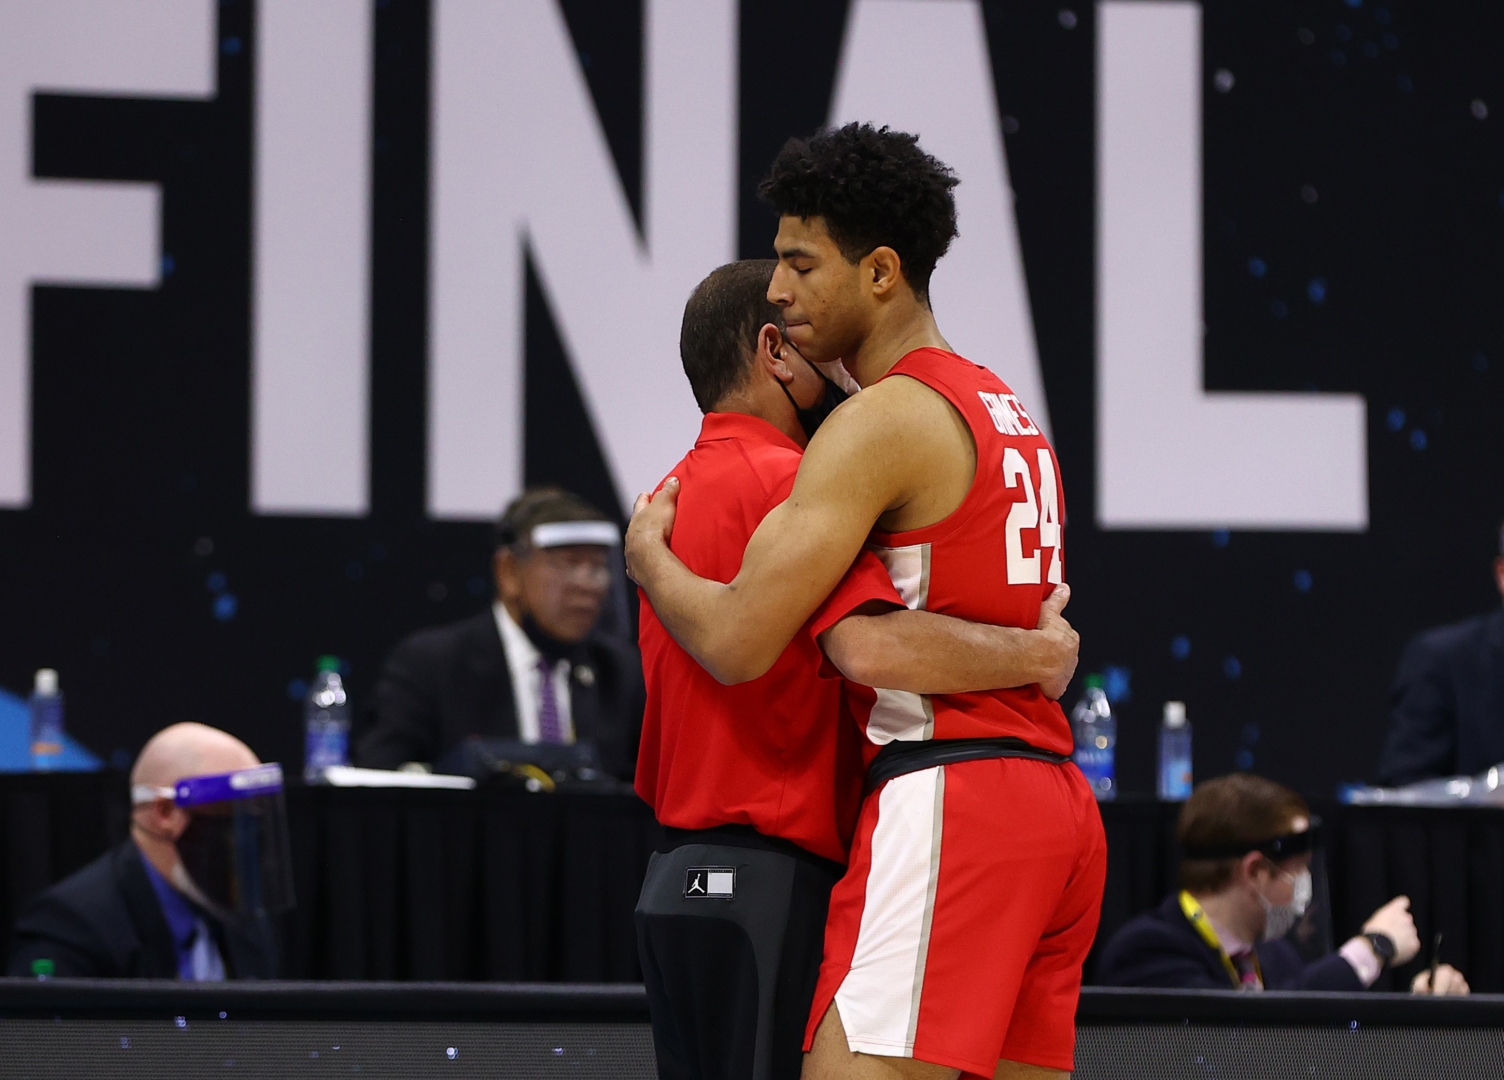 UH head coach Kelvin Sampson embraces Quentin Grimes (24) of the Cougars after a loss to the Baylor Bears in the Final Four semifinal game of the 2021 NCAA Men's Basketball Tournament at Lucas Oil Stadium on April 03, 2021 in Indianapolis, Indiana. Kelvin Sampson thanked his players for their commitment for the season after the game. | Photo by Jamie Schwaberow/NCAA Photos via Getty Images